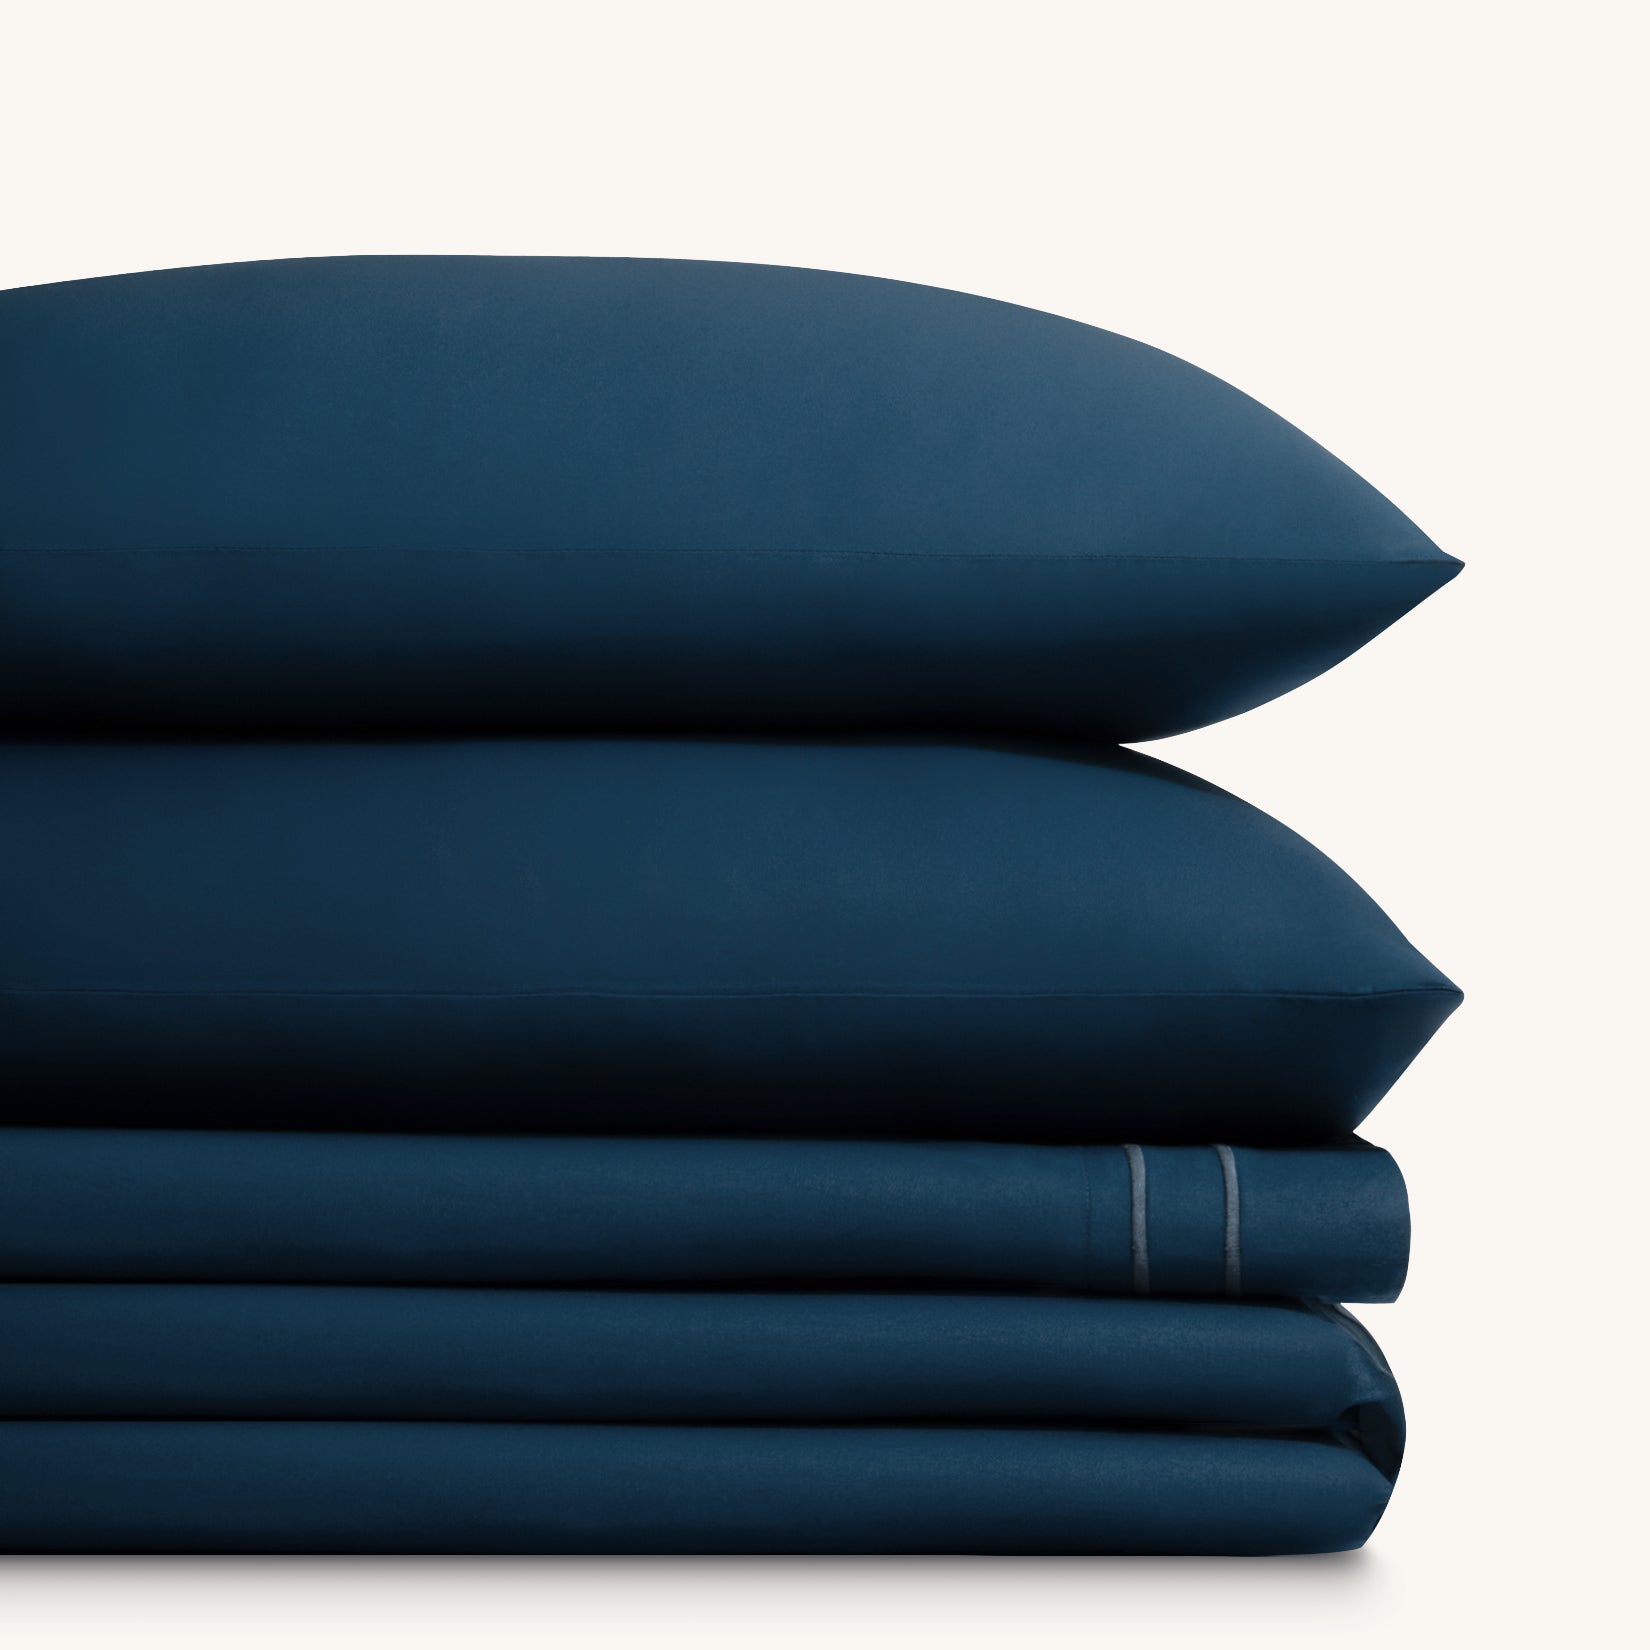 Sofia Navy Blue Double Satin Stitched Cuff 300 thread count cotton bed sheet set. Two navy pillows stacked on folded white sheet set.